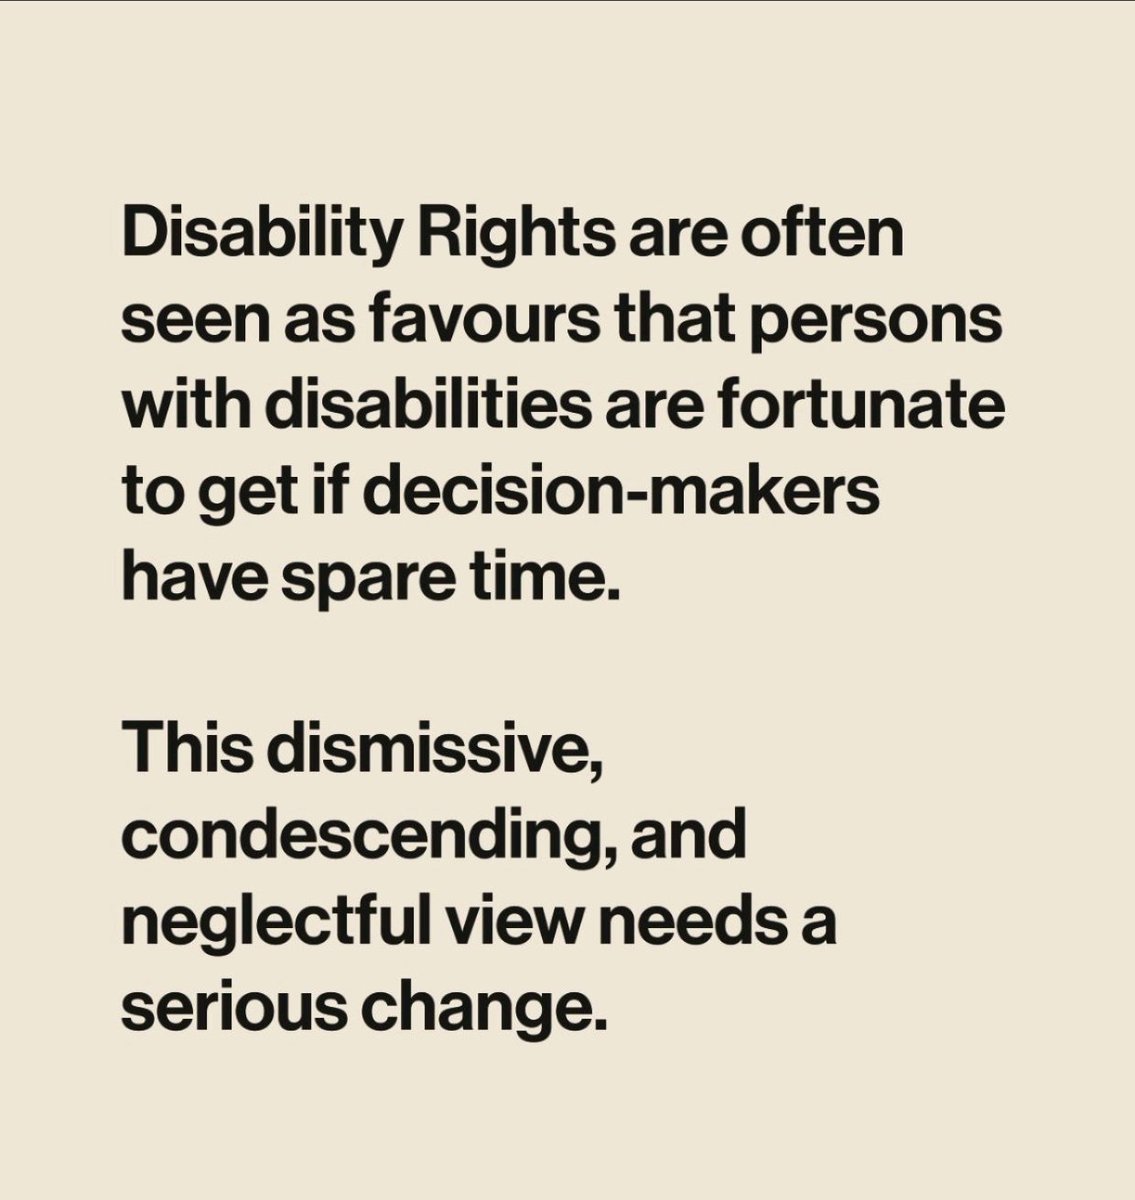 Disability Rights are often seen as favours that persons with disabilities are fortunate to get if decision-makers have spare time.

This dismissive, condescending, and neglectful view needs a serious change.

#WeAreBillionStrong #AXSChat #SDGs #DisabilityRights #Ableism